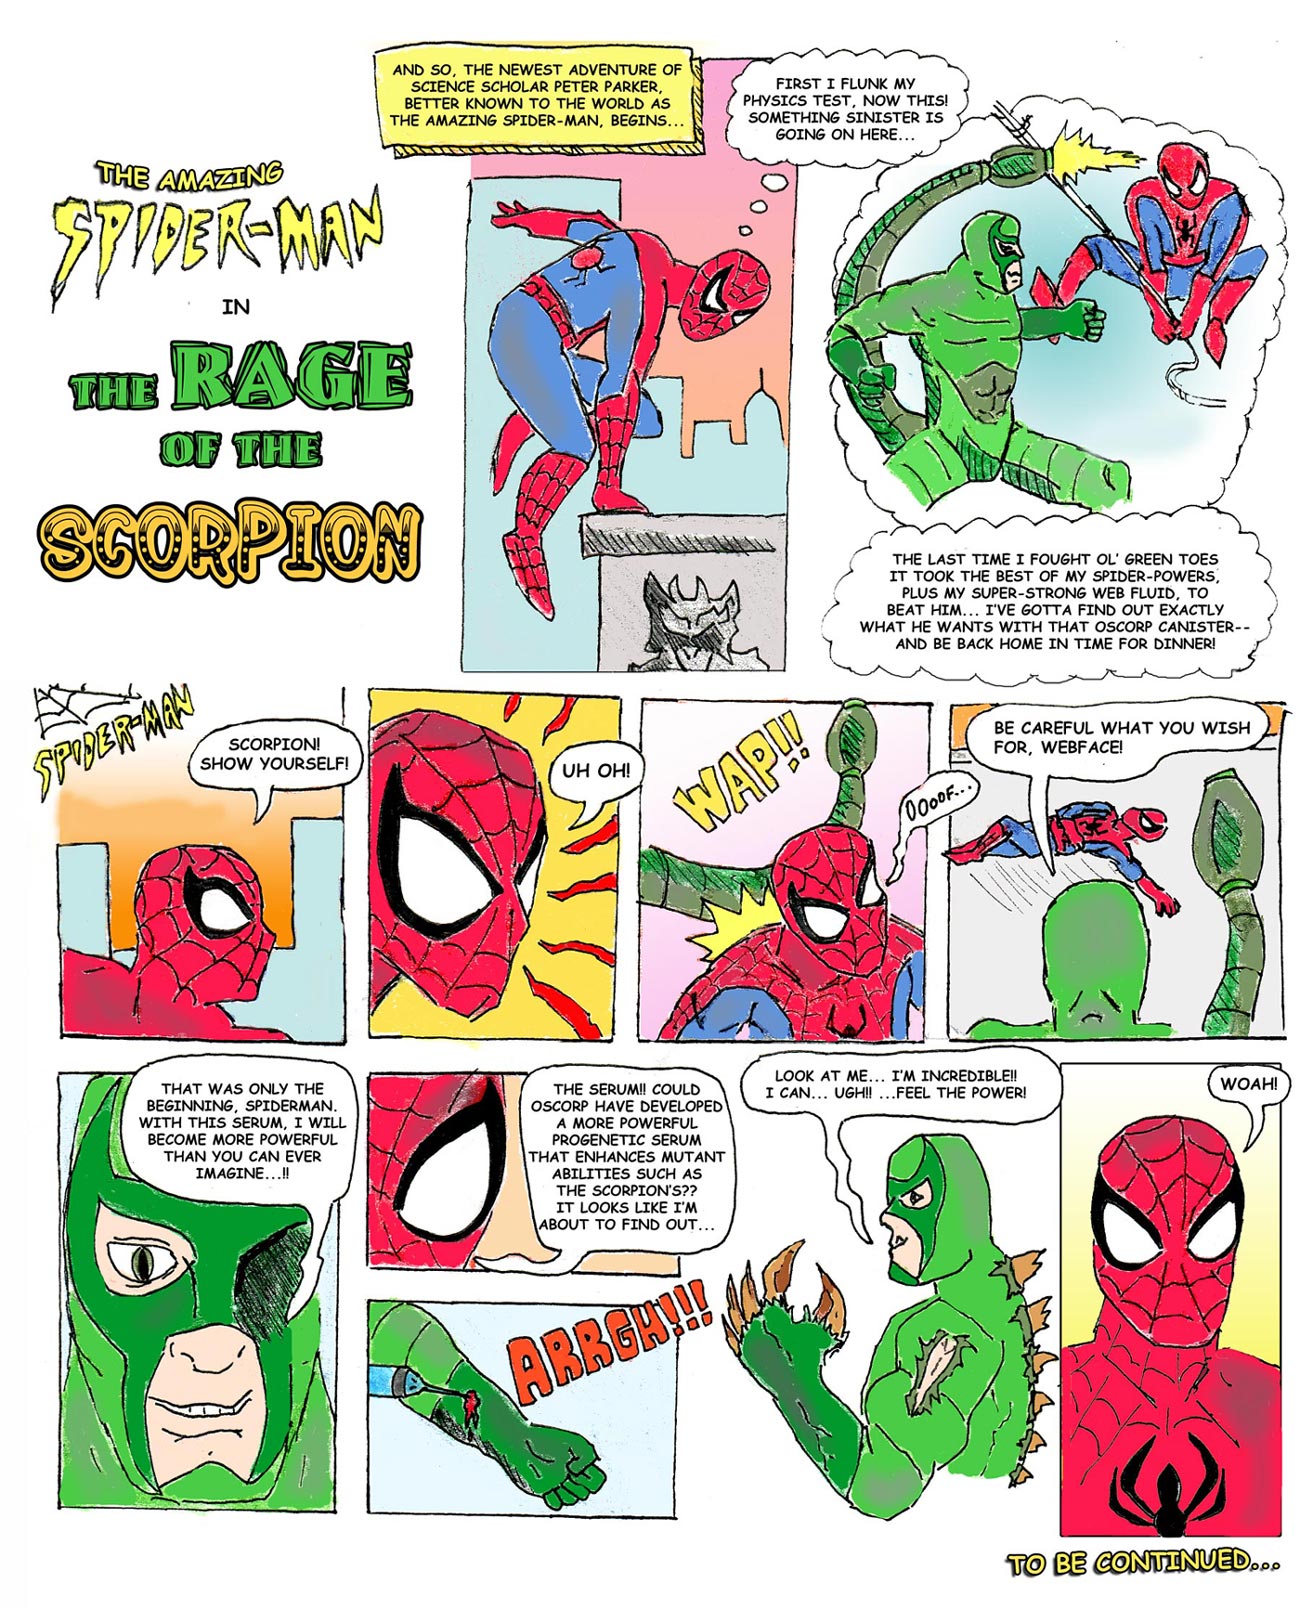 The Amazing Spider-man: 'The Rage of the Scorpion' Page 2